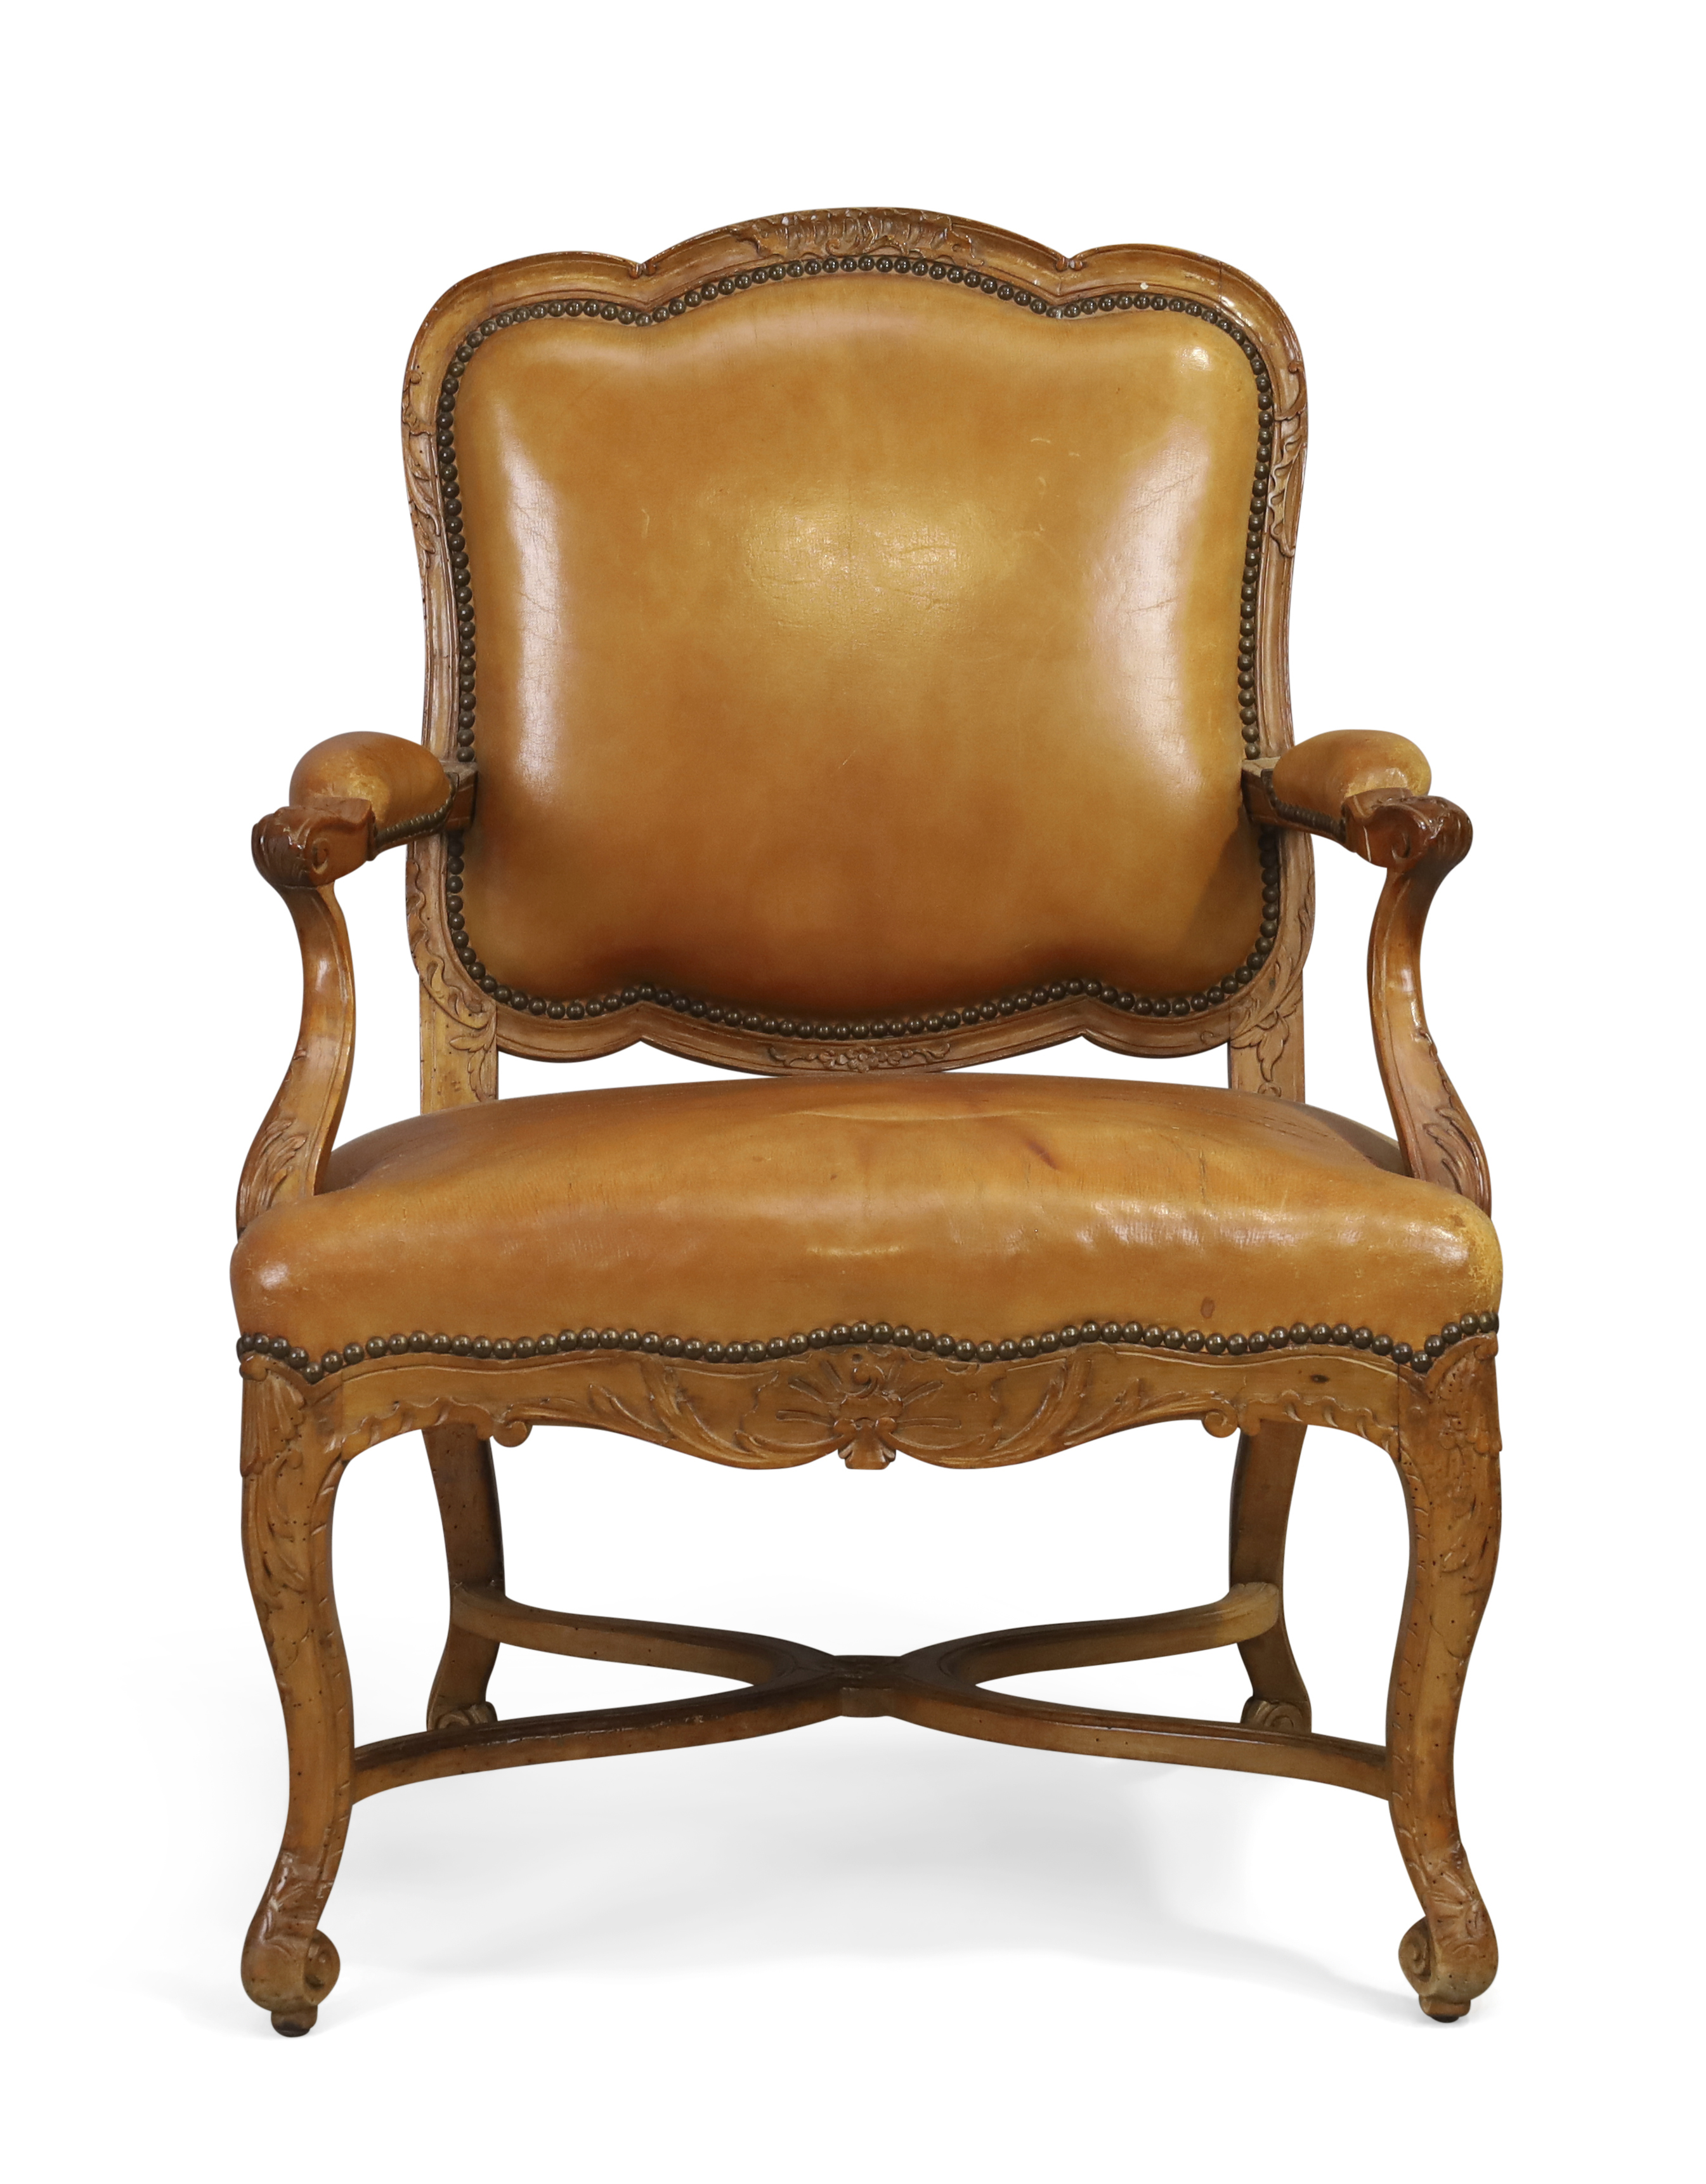 A pair of French walnut fauteuils, Of Regence style, first quarter 19th century, Each with carved... - Image 3 of 5